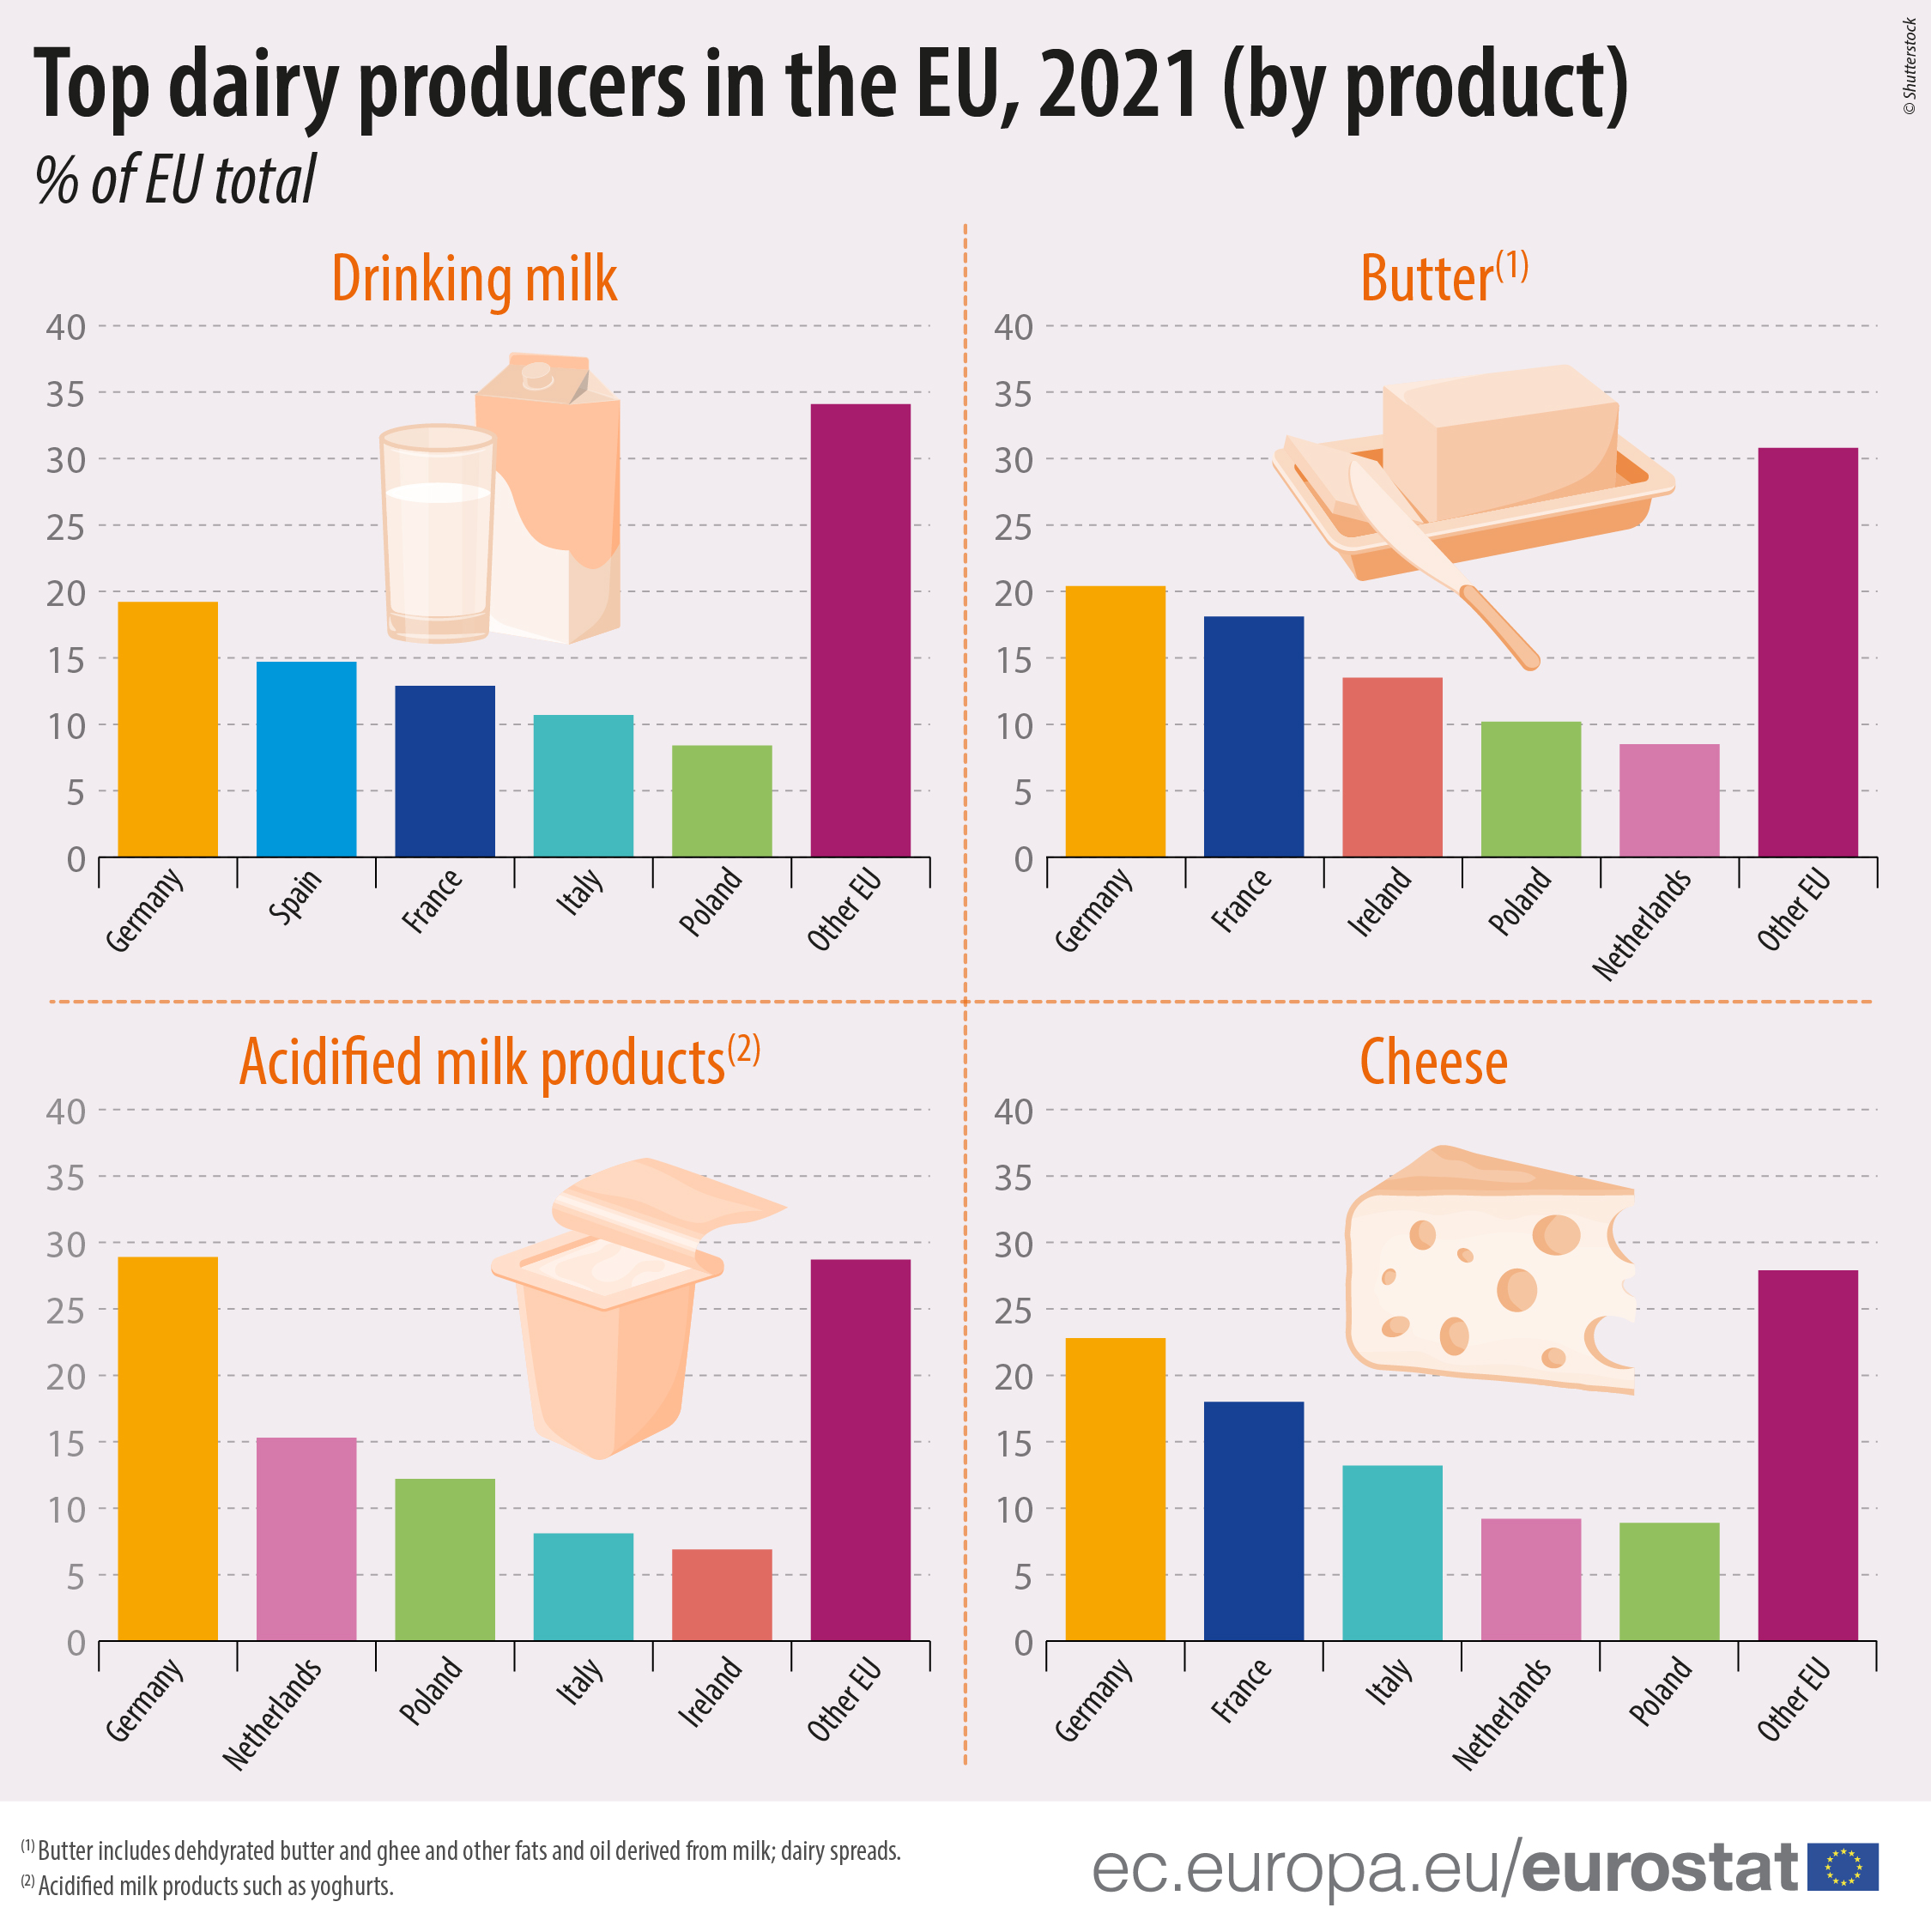 Bar graphs: Top dairy producers in the EU in 2021, by products, as a % of the EU total